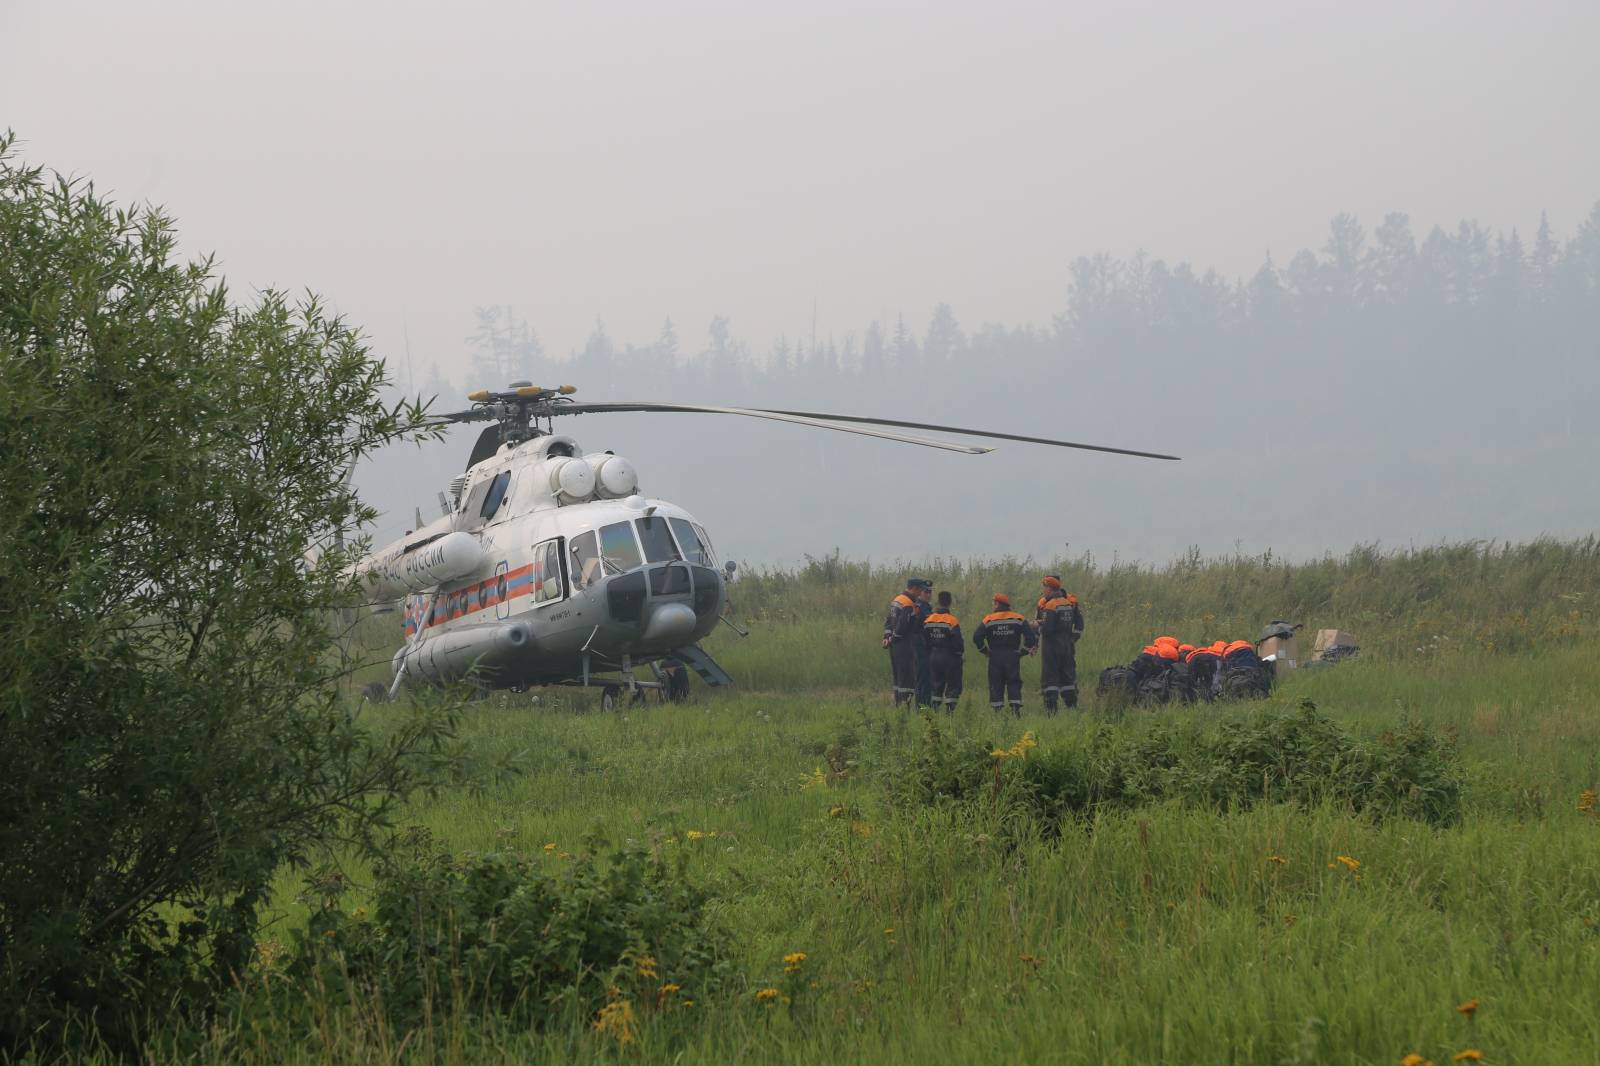 Members of the Russian Emergencies Ministry stand next to a helicopter near the site of a wildfire in Krasnoyarsk region